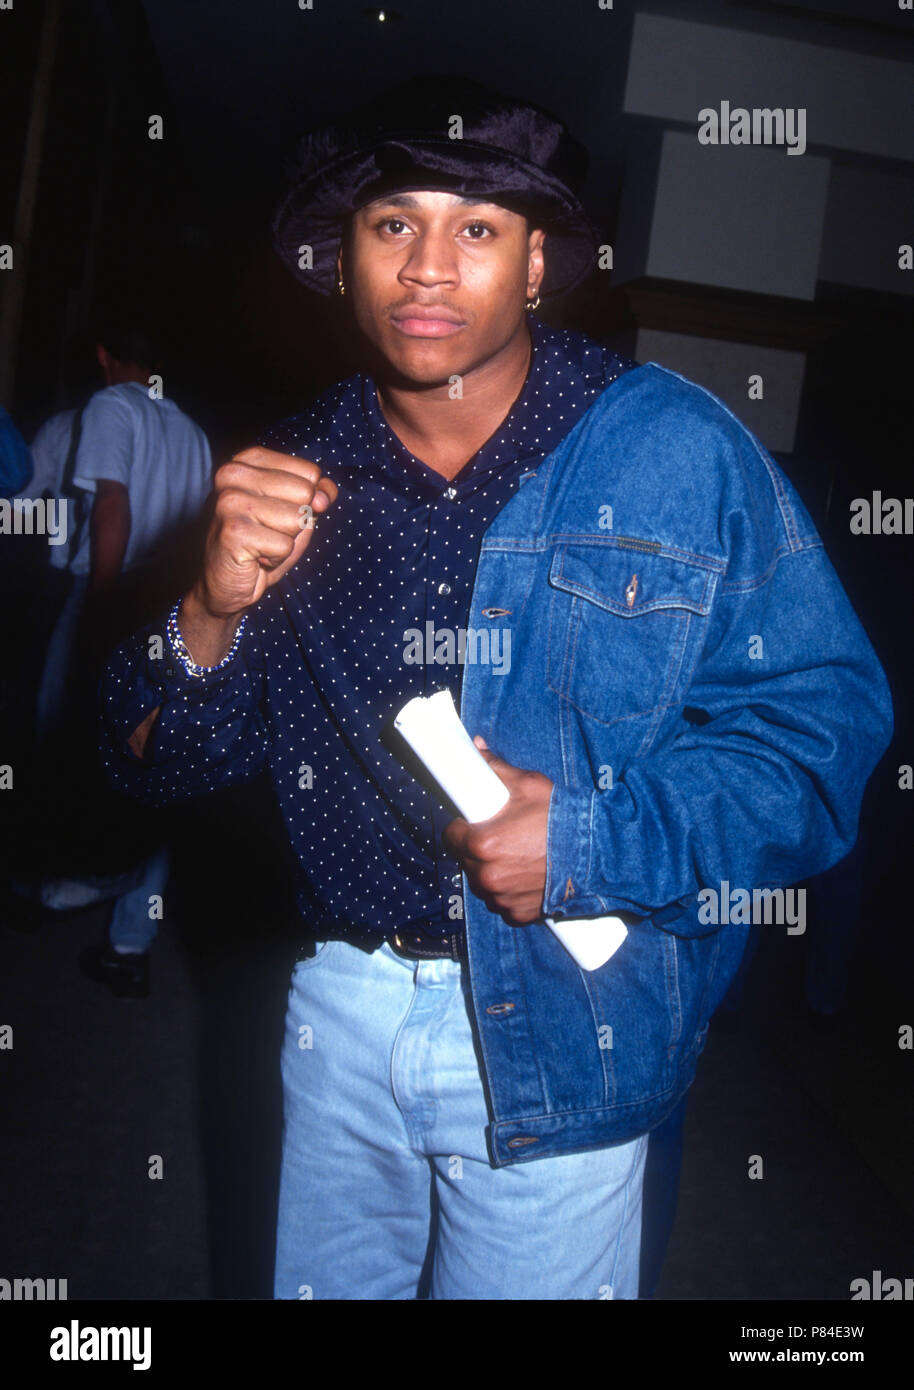 UNIVERSAL CITY, CA - FEBRUARY 15: Rapper/actor LL Cool J sighting on February 15, 1992 at Univeral Sheraton in Universal City, California. Photo by Barry King/Alamy Stock Photo Stock Photo